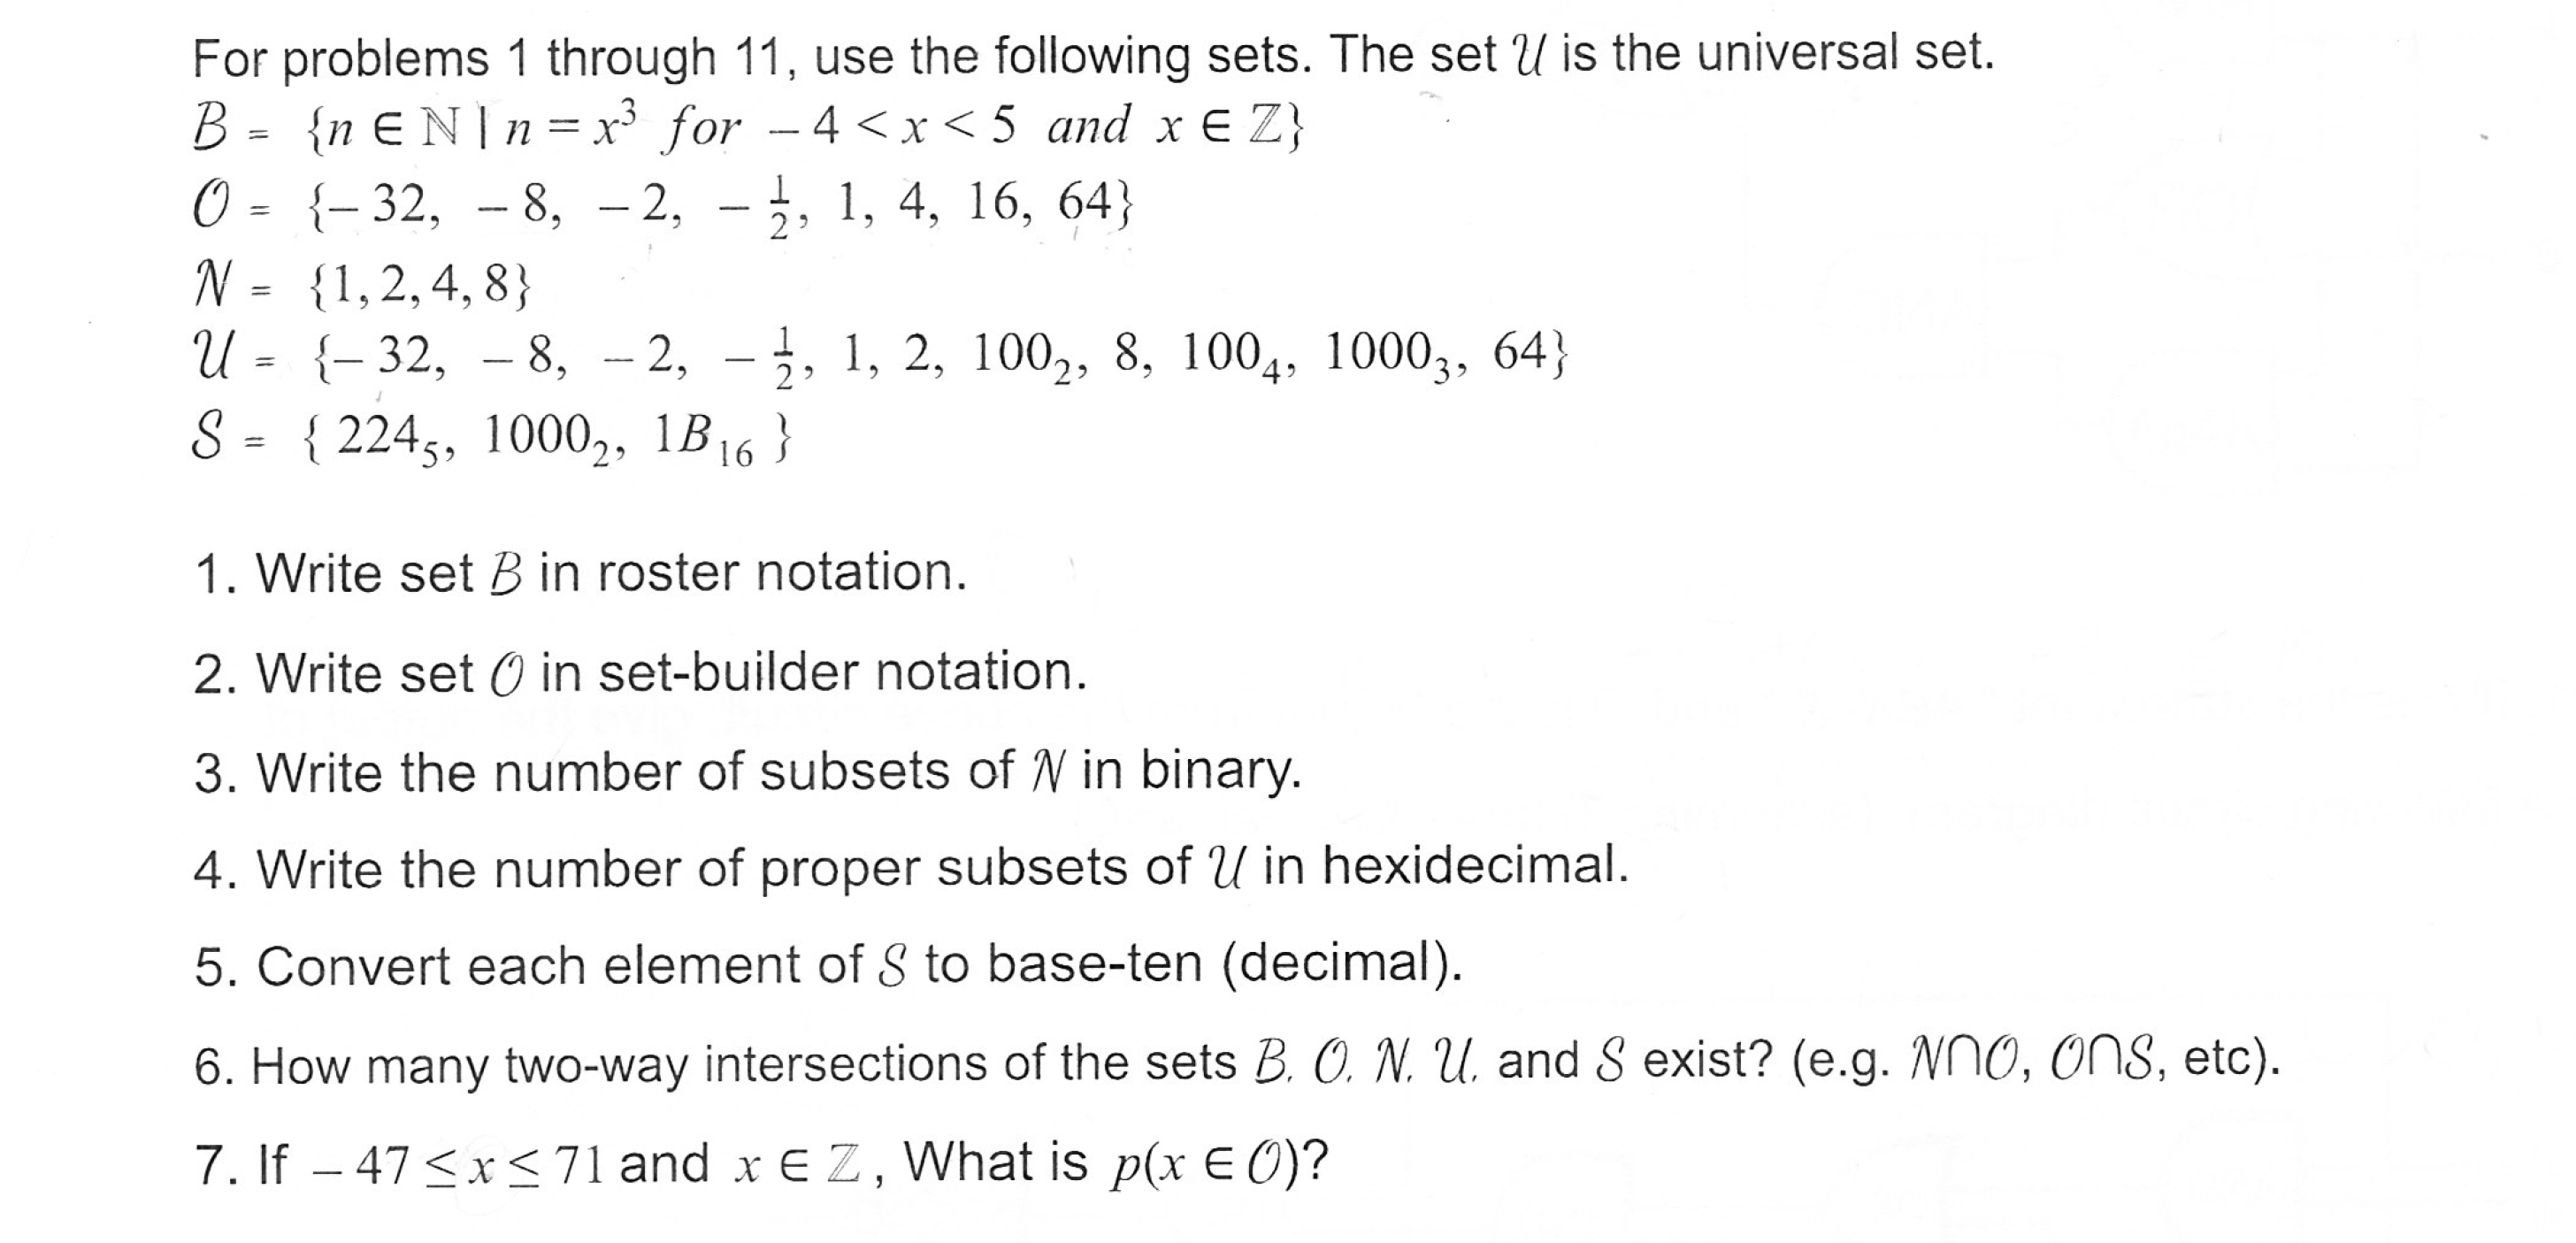 For problems 1 through 11, use the following sets. The set U is the universal set.
0- -32, -8, -2, - ,, 1, 4, 16, 64)
N-1,2,4, 8
U= {-32, -8, -2, -2, 1, 2, 100-, 8. 1004, 1000,, 64)
S= { 2245, 10002, 1B16 }
1. Write set Bin roster notation
2. Write set 0 in set-builder notation
3. Write the number of subsets of V in binary
4. Write the number of proper subsets of U in hexidecimal
5. Convert each element of S to base-ten (decimal)
6. How many two-way intersections of the sets B. O N ,L and Š exist? (e.g. Nno, ons, etc)
7. If - 47<x<71 and x EZ, What is p(x EO)?
